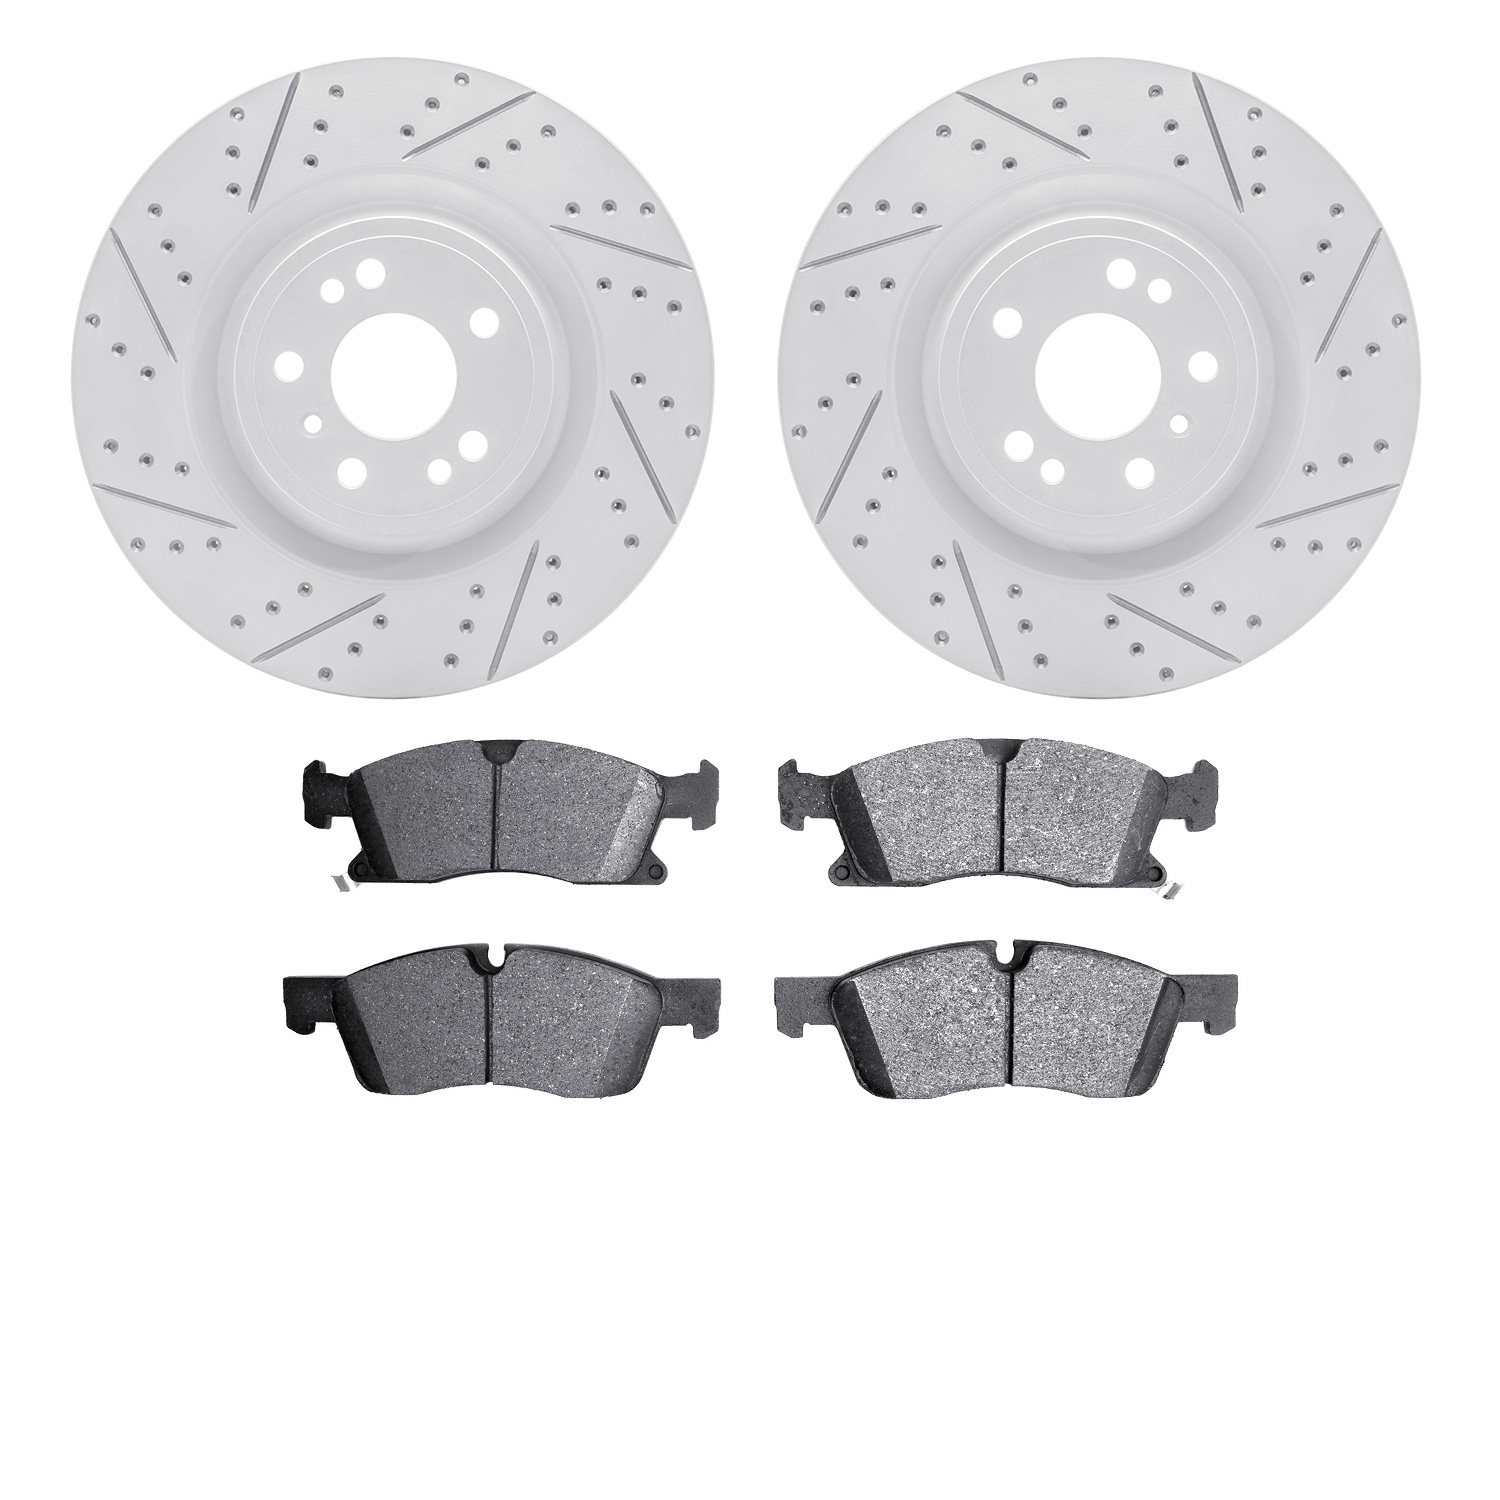 2402-63002 Geoperformance Drilled/Slotted Brake Rotors with Ultimate-Duty Brake Pads Kit, 2013-2019 Mercedes-Benz, Position: Fro